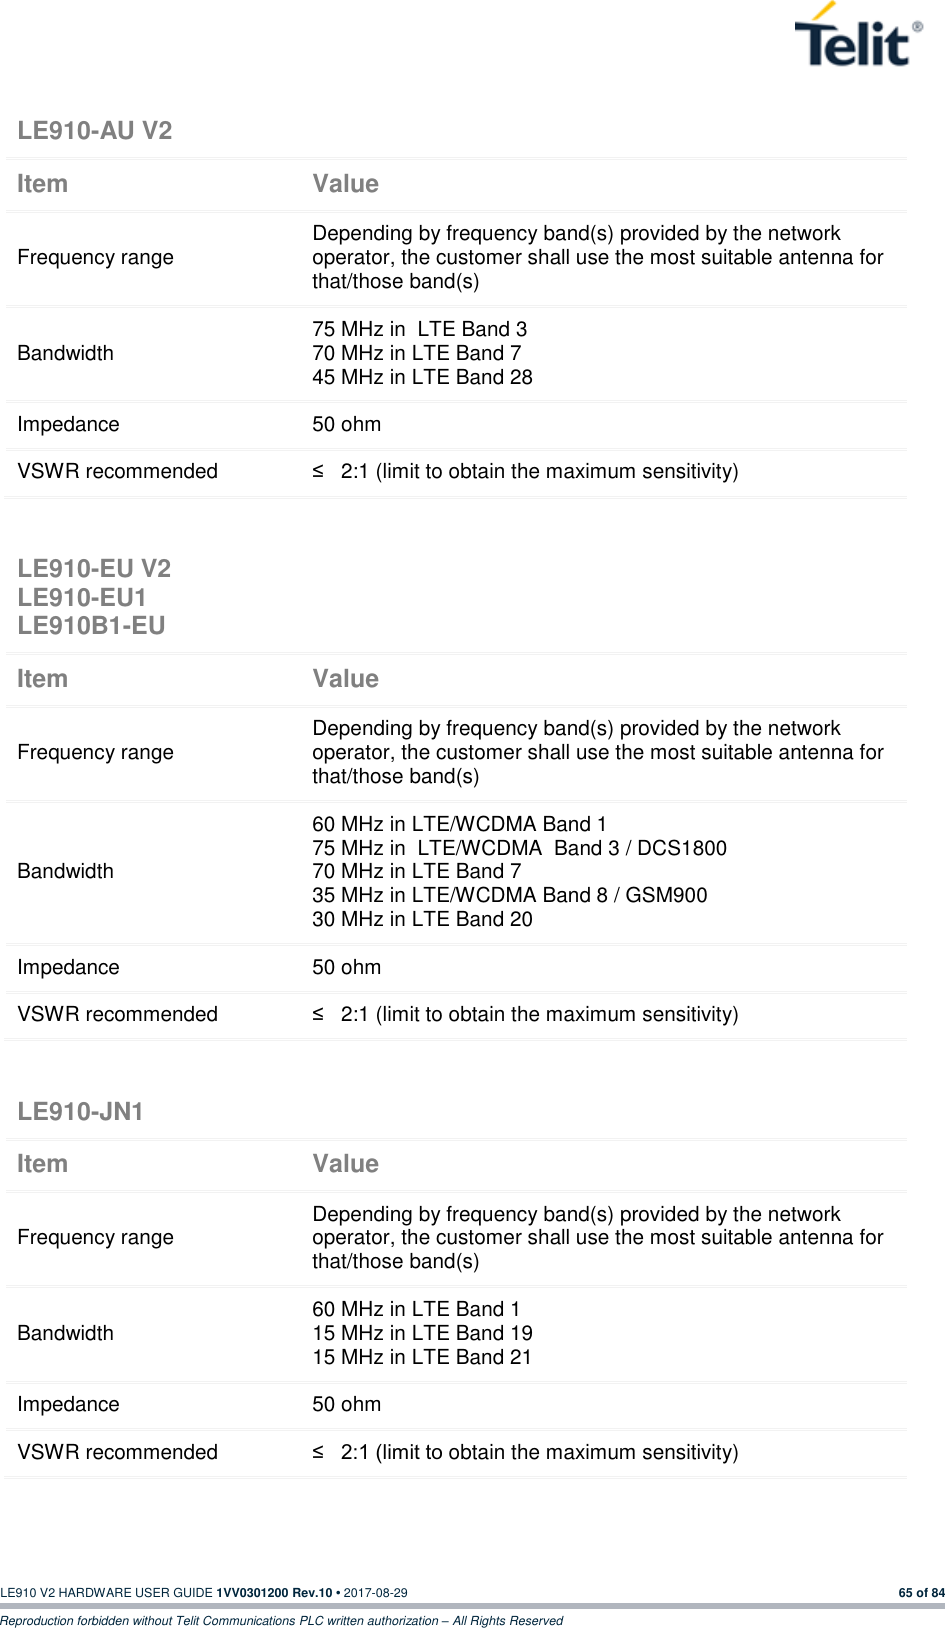   LE910 V2 HARDWARE USER GUIDE 1VV0301200 Rev.10 • 2017-08-29  65 of 84 Reproduction forbidden without Telit Communications PLC written authorization – All Rights Reserved      LE910-AU V2  Item Value Frequency range Depending by frequency band(s) provided by the network operator, the customer shall use the most suitable antenna for that/those band(s) Bandwidth 75 MHz in  LTE Band 3 70 MHz in LTE Band 7 45 MHz in LTE Band 28 Impedance 50 ohm VSWR recommended ≤   2:1 (limit to obtain the maximum sensitivity) LE910-EU V2 LE910-EU1 LE910B1-EU  Item Value Frequency range Depending by frequency band(s) provided by the network operator, the customer shall use the most suitable antenna for that/those band(s) Bandwidth 60 MHz in LTE/WCDMA Band 1 75 MHz in  LTE/WCDMA  Band 3 / DCS1800 70 MHz in LTE Band 7 35 MHz in LTE/WCDMA Band 8 / GSM900 30 MHz in LTE Band 20 Impedance 50 ohm VSWR recommended ≤   2:1 (limit to obtain the maximum sensitivity) LE910-JN1  Item Value Frequency range Depending by frequency band(s) provided by the network operator, the customer shall use the most suitable antenna for that/those band(s) Bandwidth 60 MHz in LTE Band 1 15 MHz in LTE Band 19 15 MHz in LTE Band 21 Impedance 50 ohm VSWR recommended ≤   2:1 (limit to obtain the maximum sensitivity) 